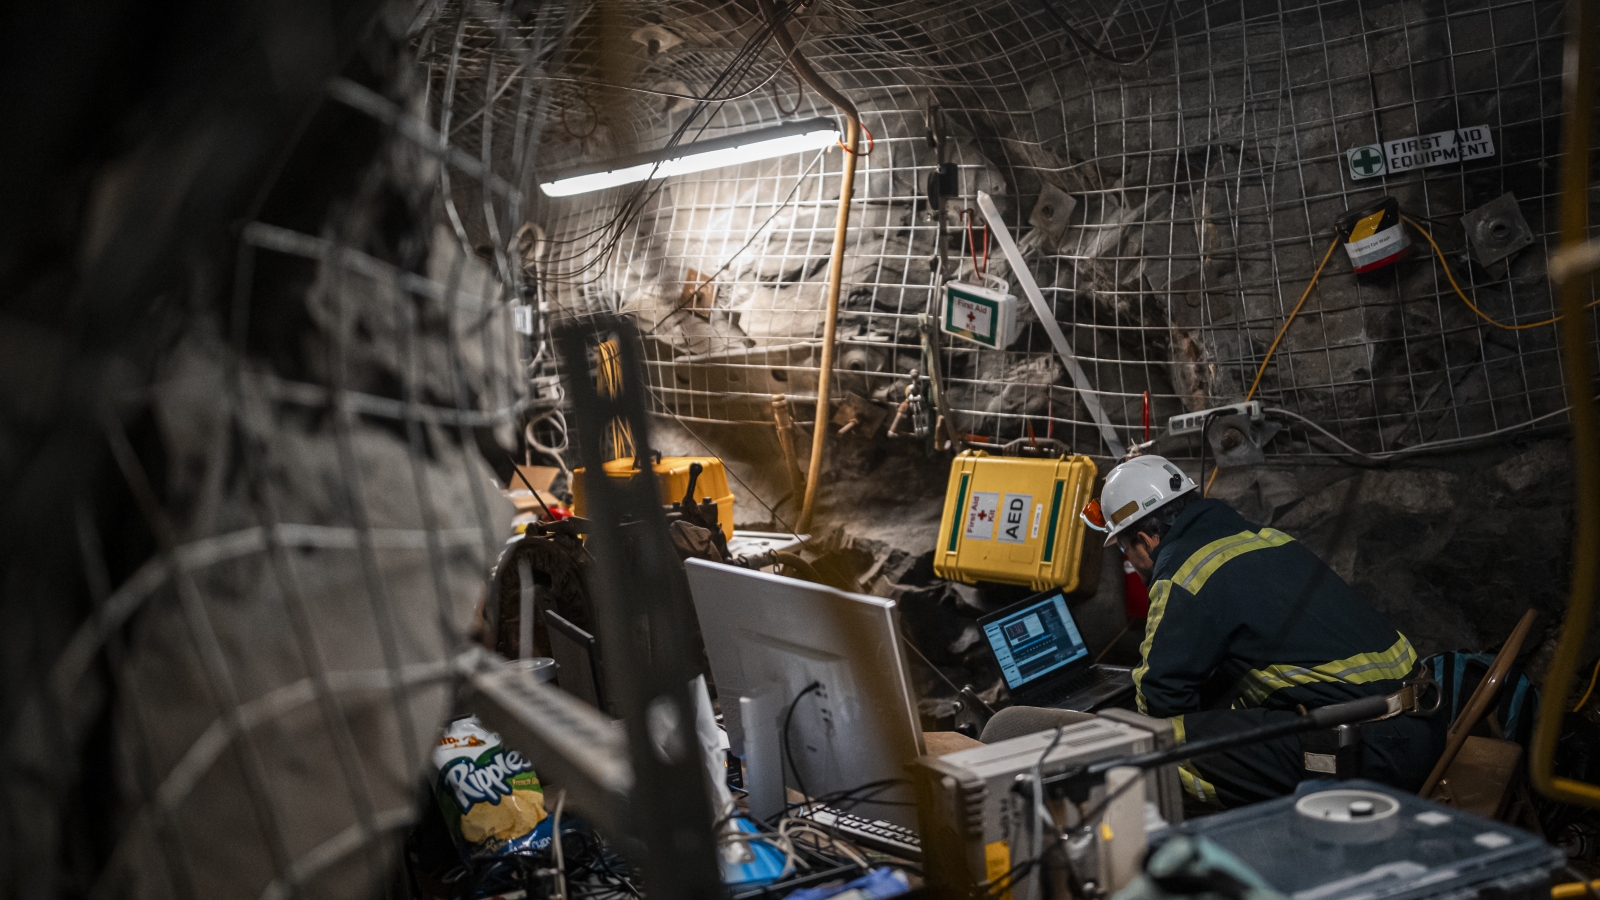 A researcher sits in a drift, looking at a computer. The drift is heavily outfitted with scientific monitoring equipment.